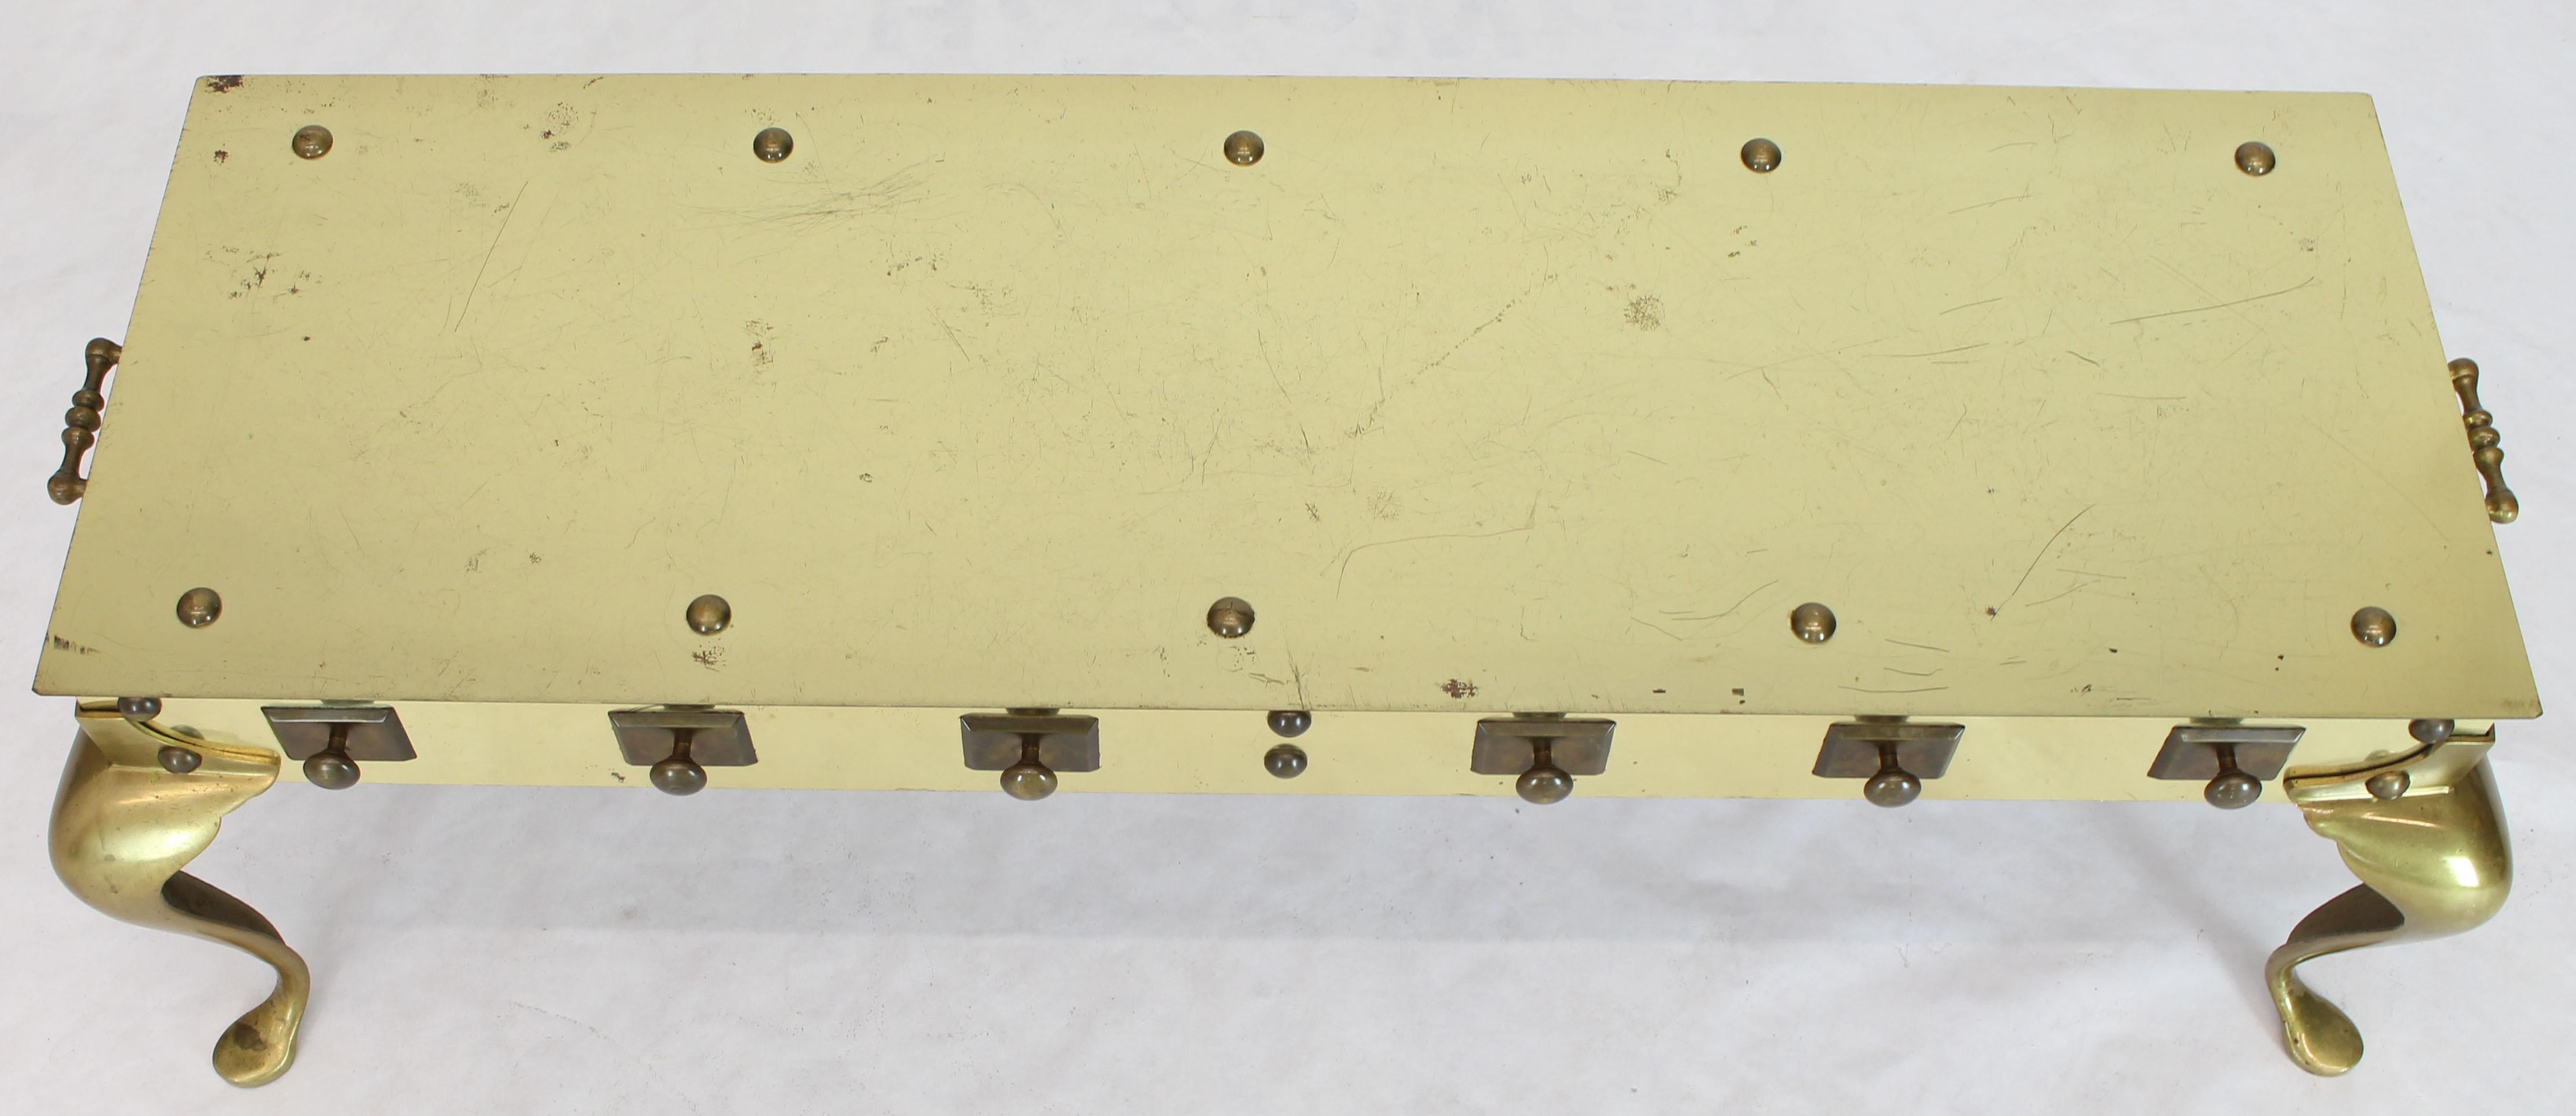 All Solid Brass Studded Rectangular Table with Carry Handles In Good Condition For Sale In Rockaway, NJ